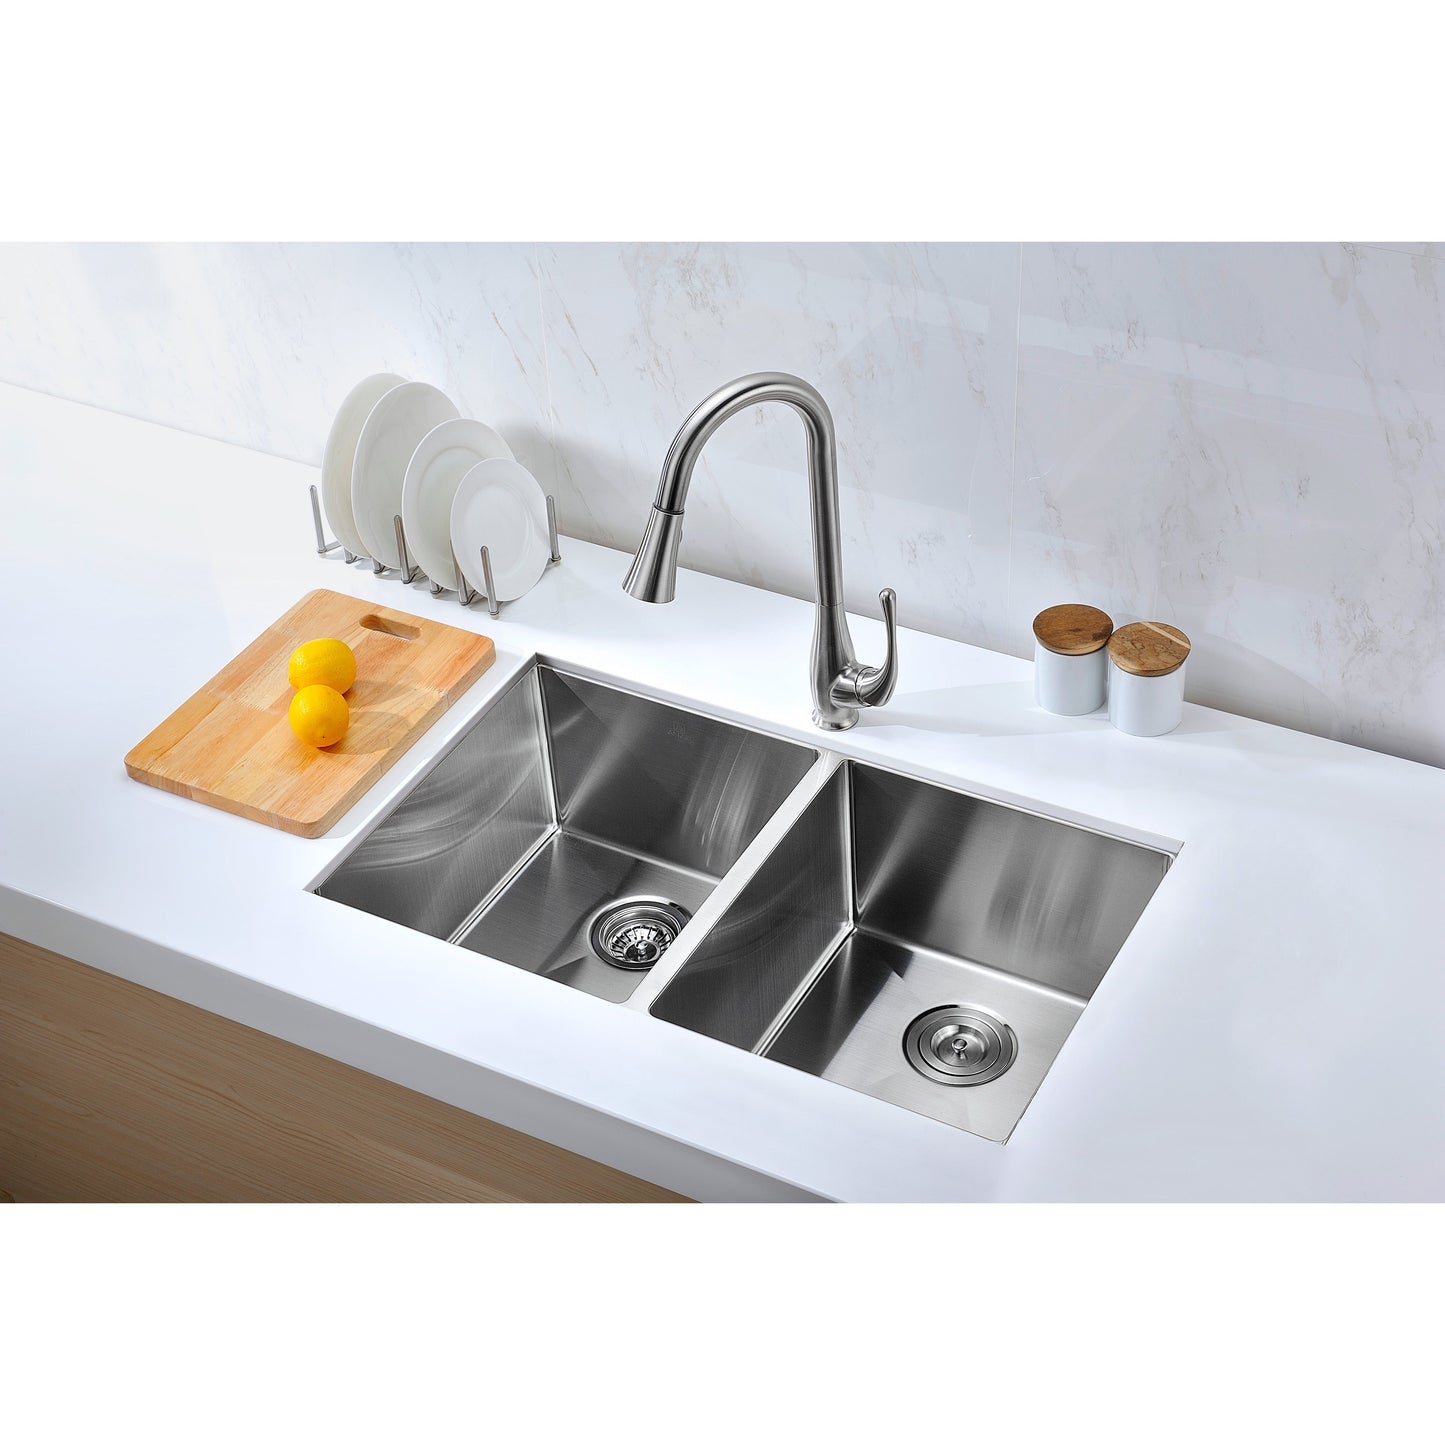 ANZZI Vanguard Series 32" Double Bowl 50/50 Stainless Steel Undermount Kitchen Sink With Strainer and Drain Assembly